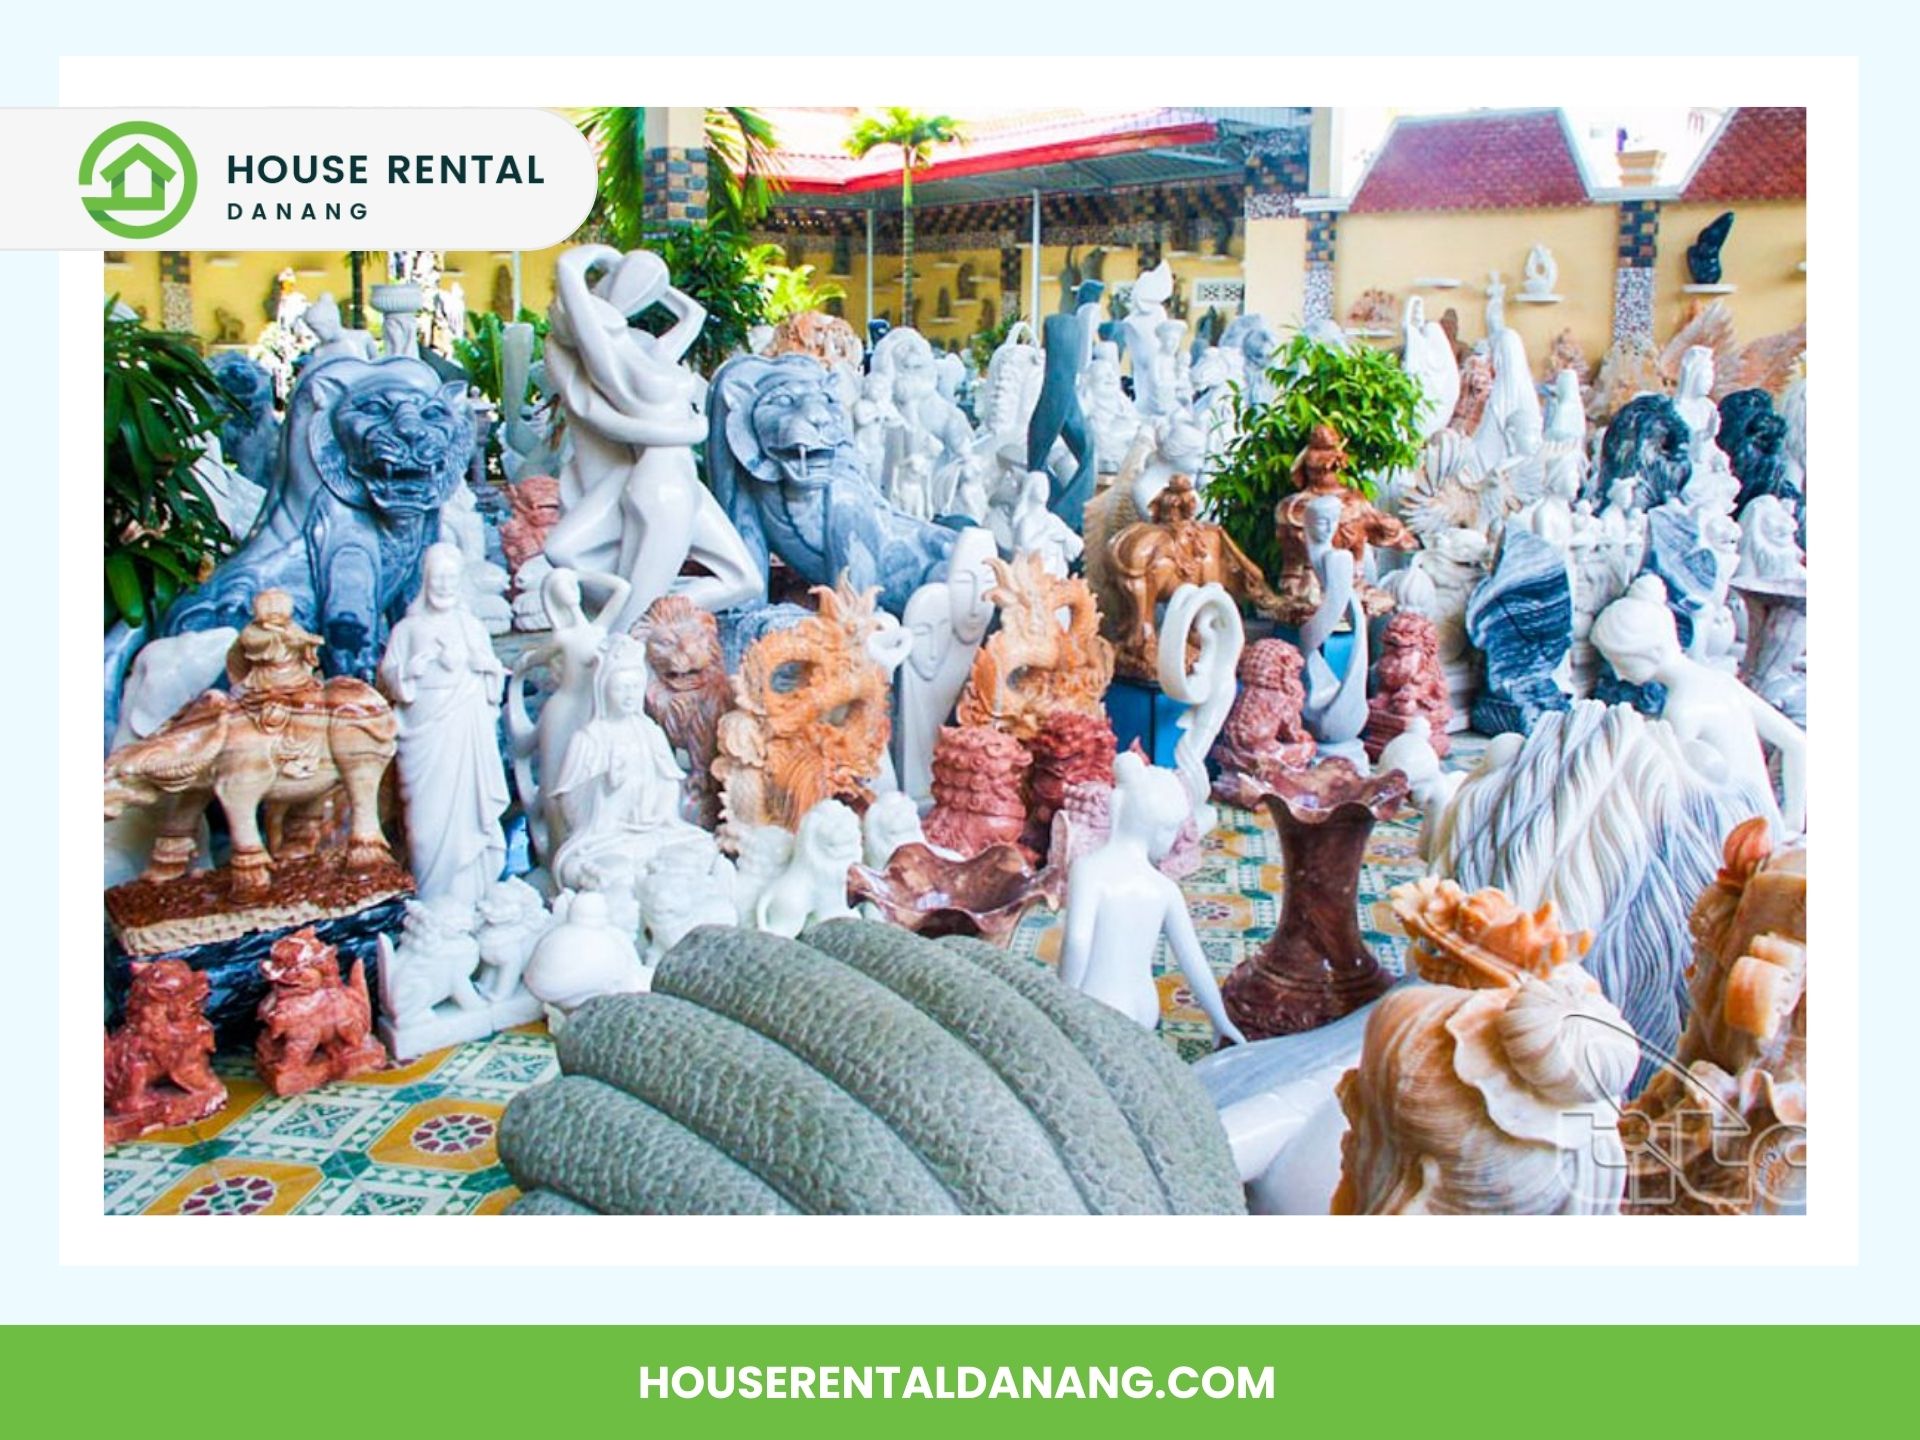 A variety of marble statues in different shapes and sizes are displayed outdoors in a yard, making it one of the best places for shopping in Da Nang.